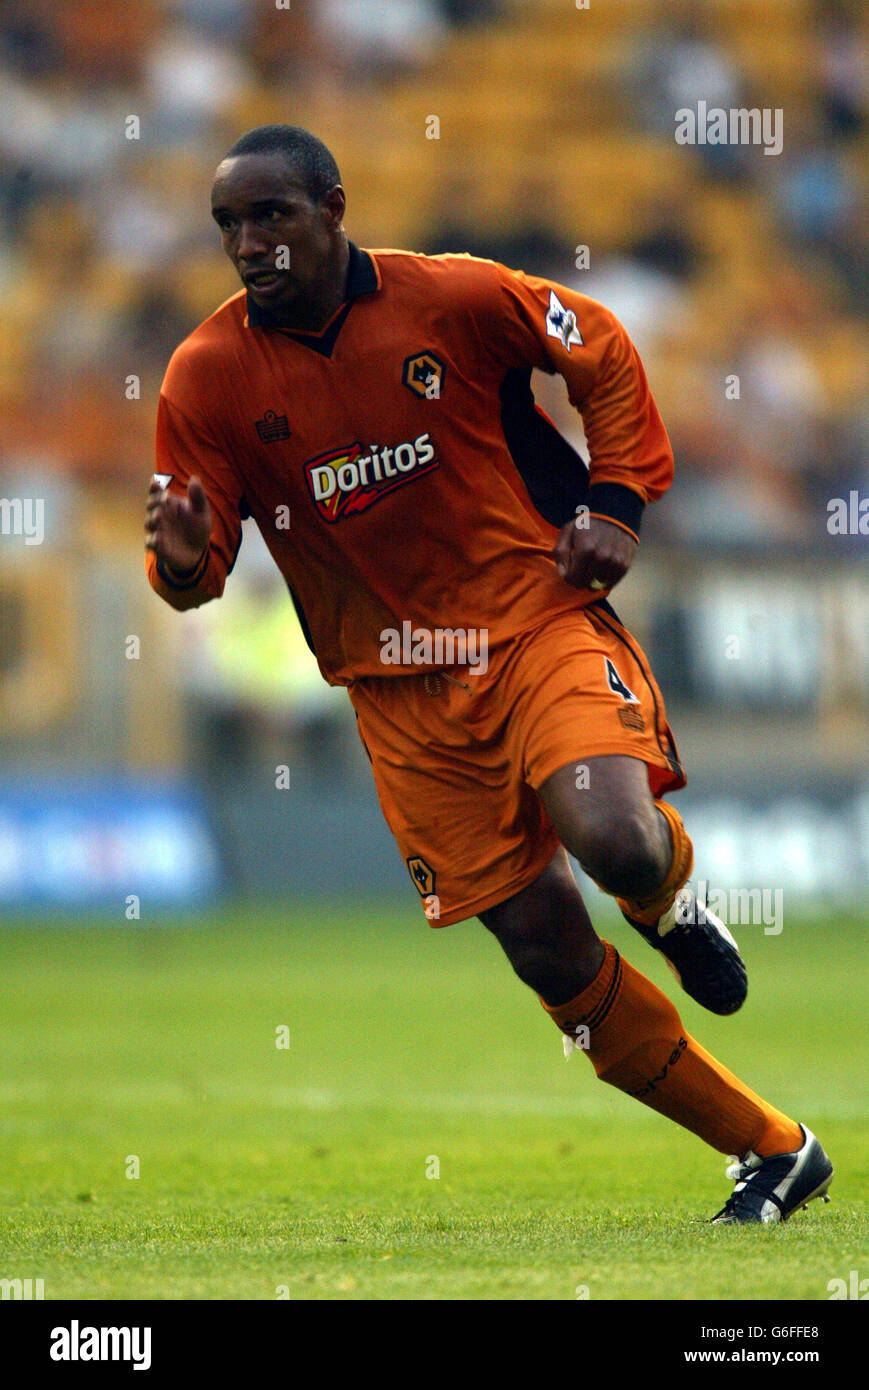 Paul Ince in action for Wolves during their pre-season friendly match against Boavista of Portugal, at their Molineux stadium, Wolverhampton.3F4D9497.JPG Stock Photo